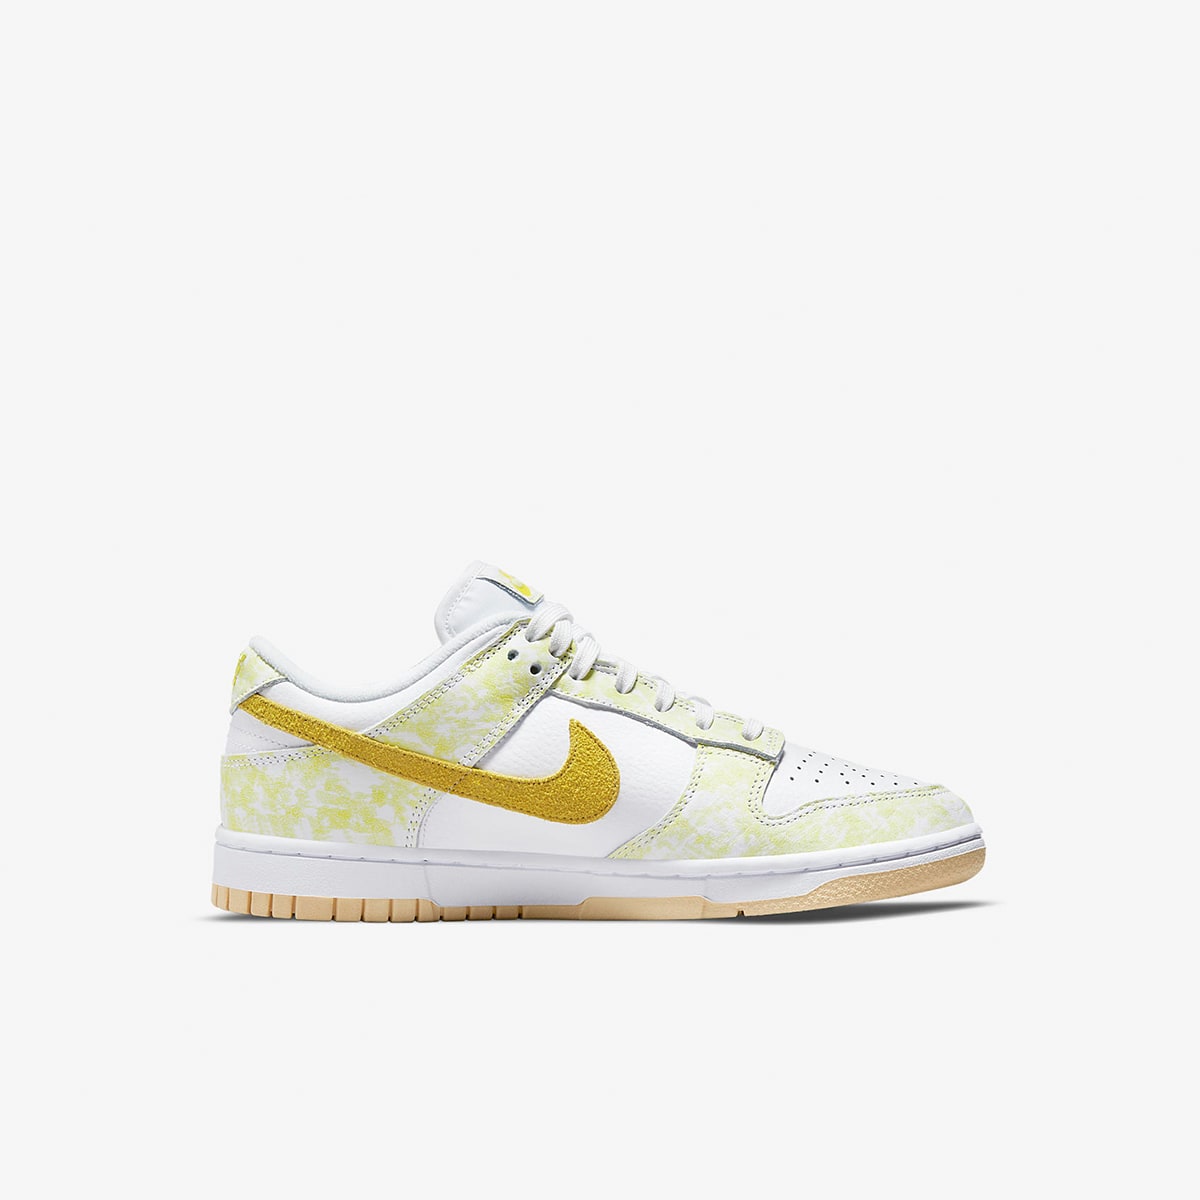 Nike Dunk Low OG W (Yellow Strike) | END. Launches